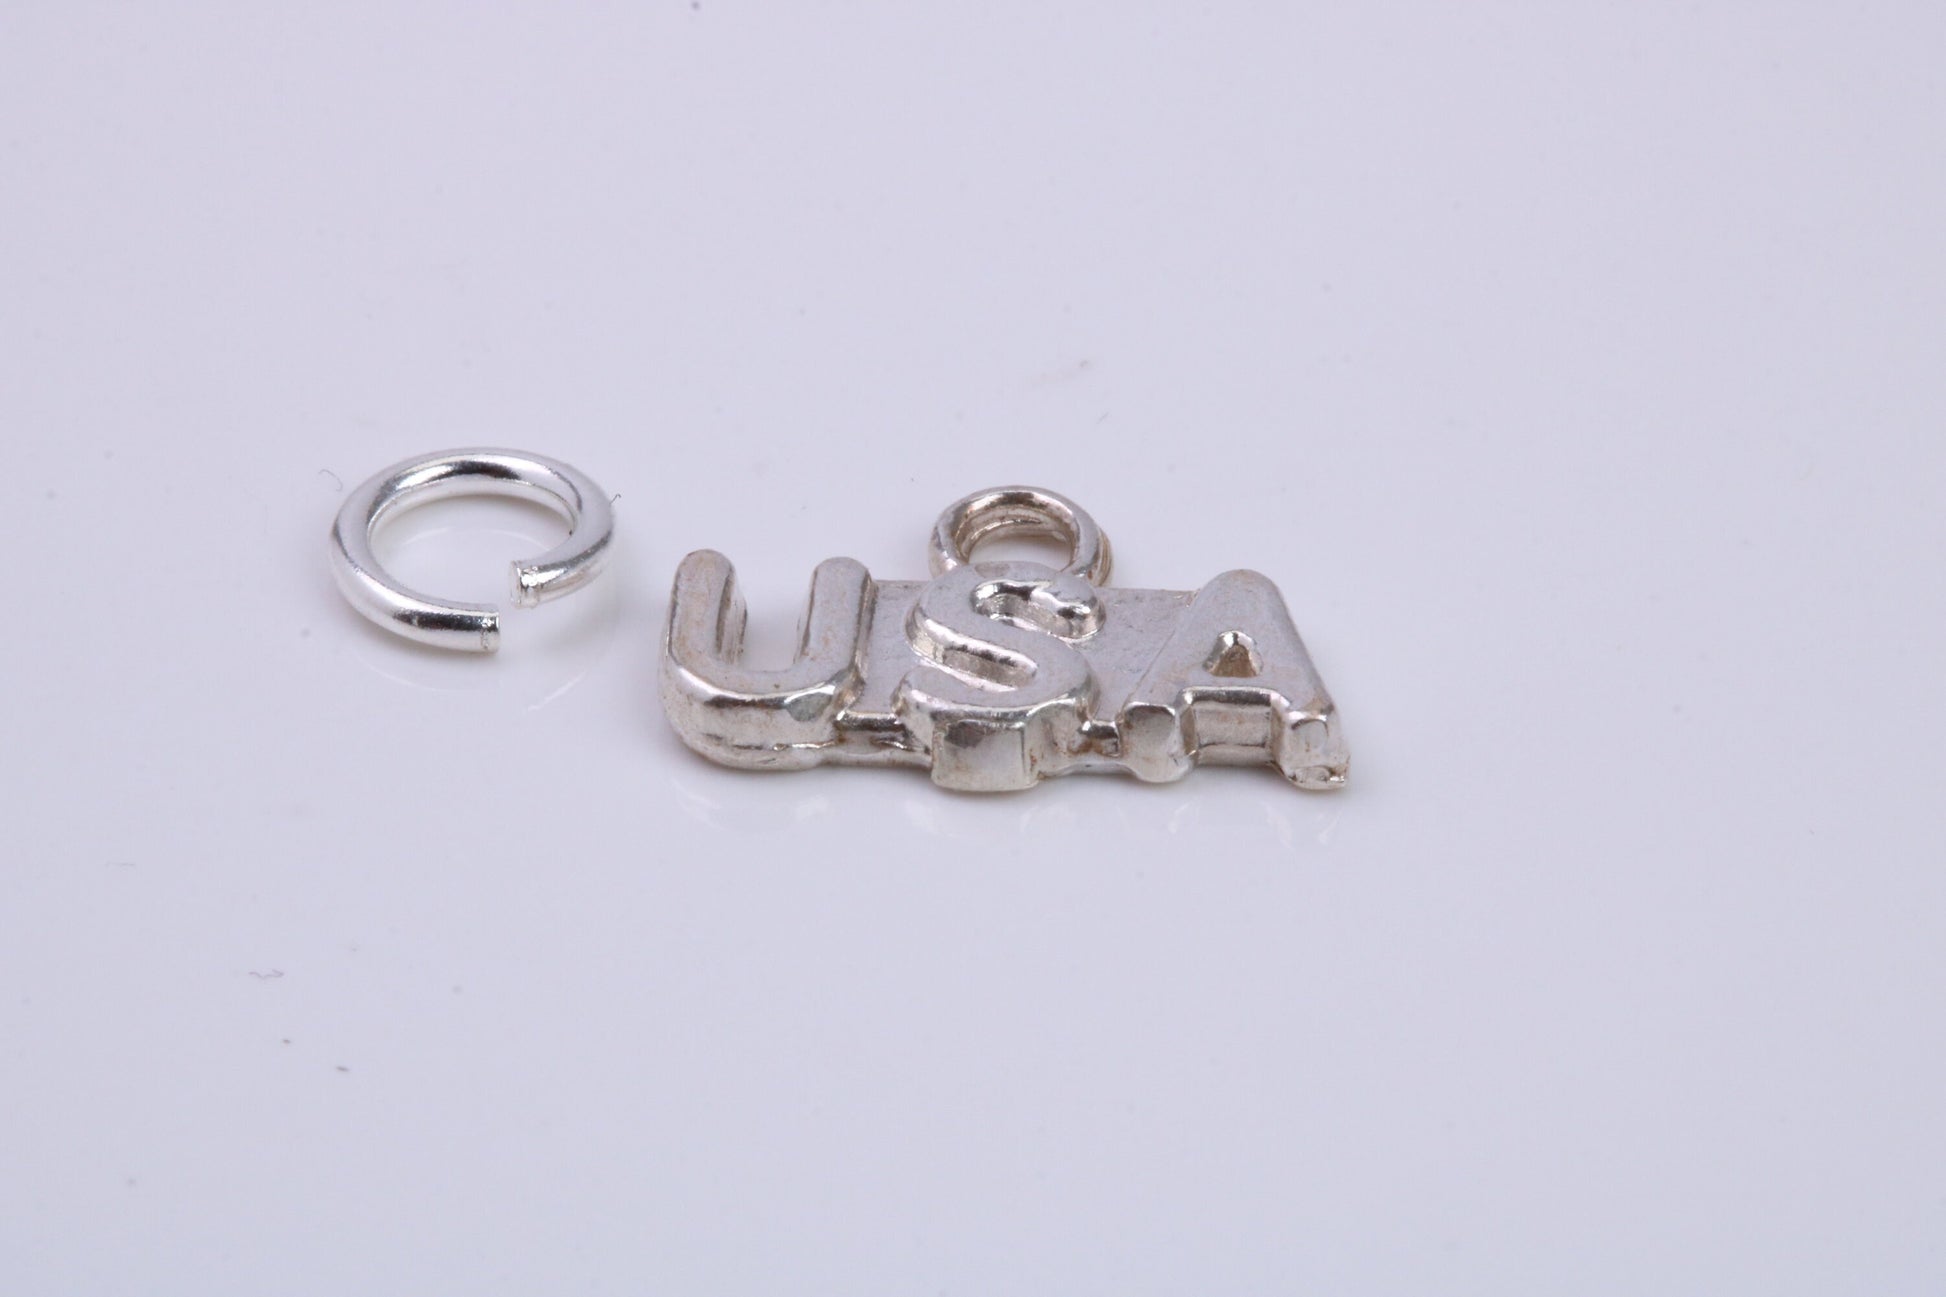 USA Charm, Traditional Charm, Made from Solid 925 Grade Sterling Silver, Complete with Attachment Link